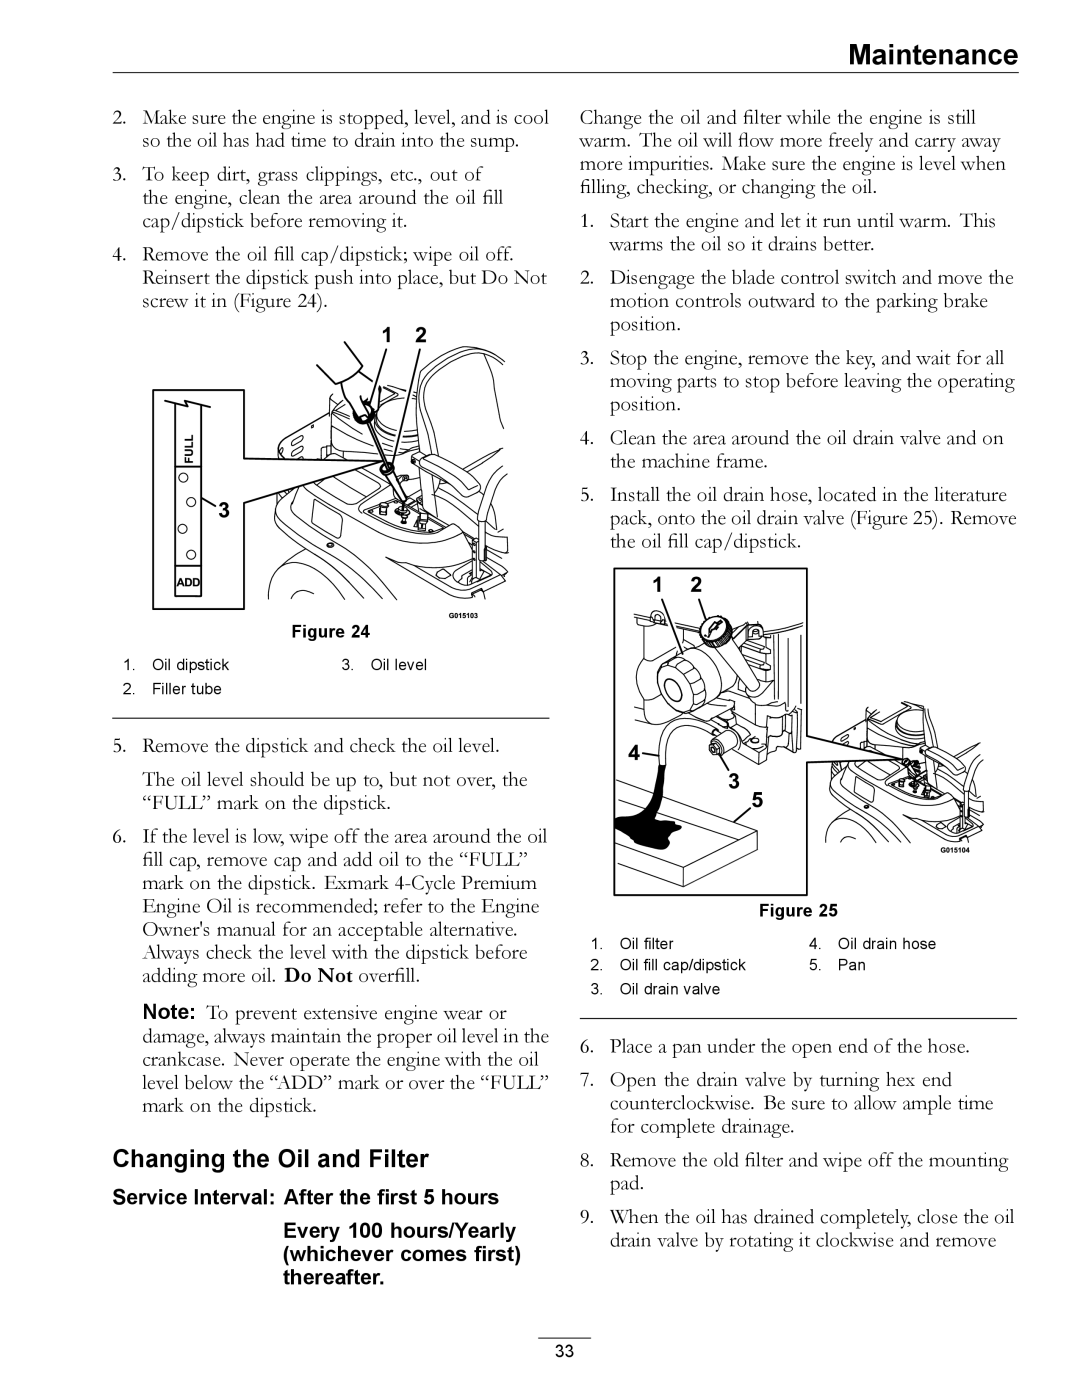 Exmark 4501-191 Rev.A manual Changing the Oil and Filter 